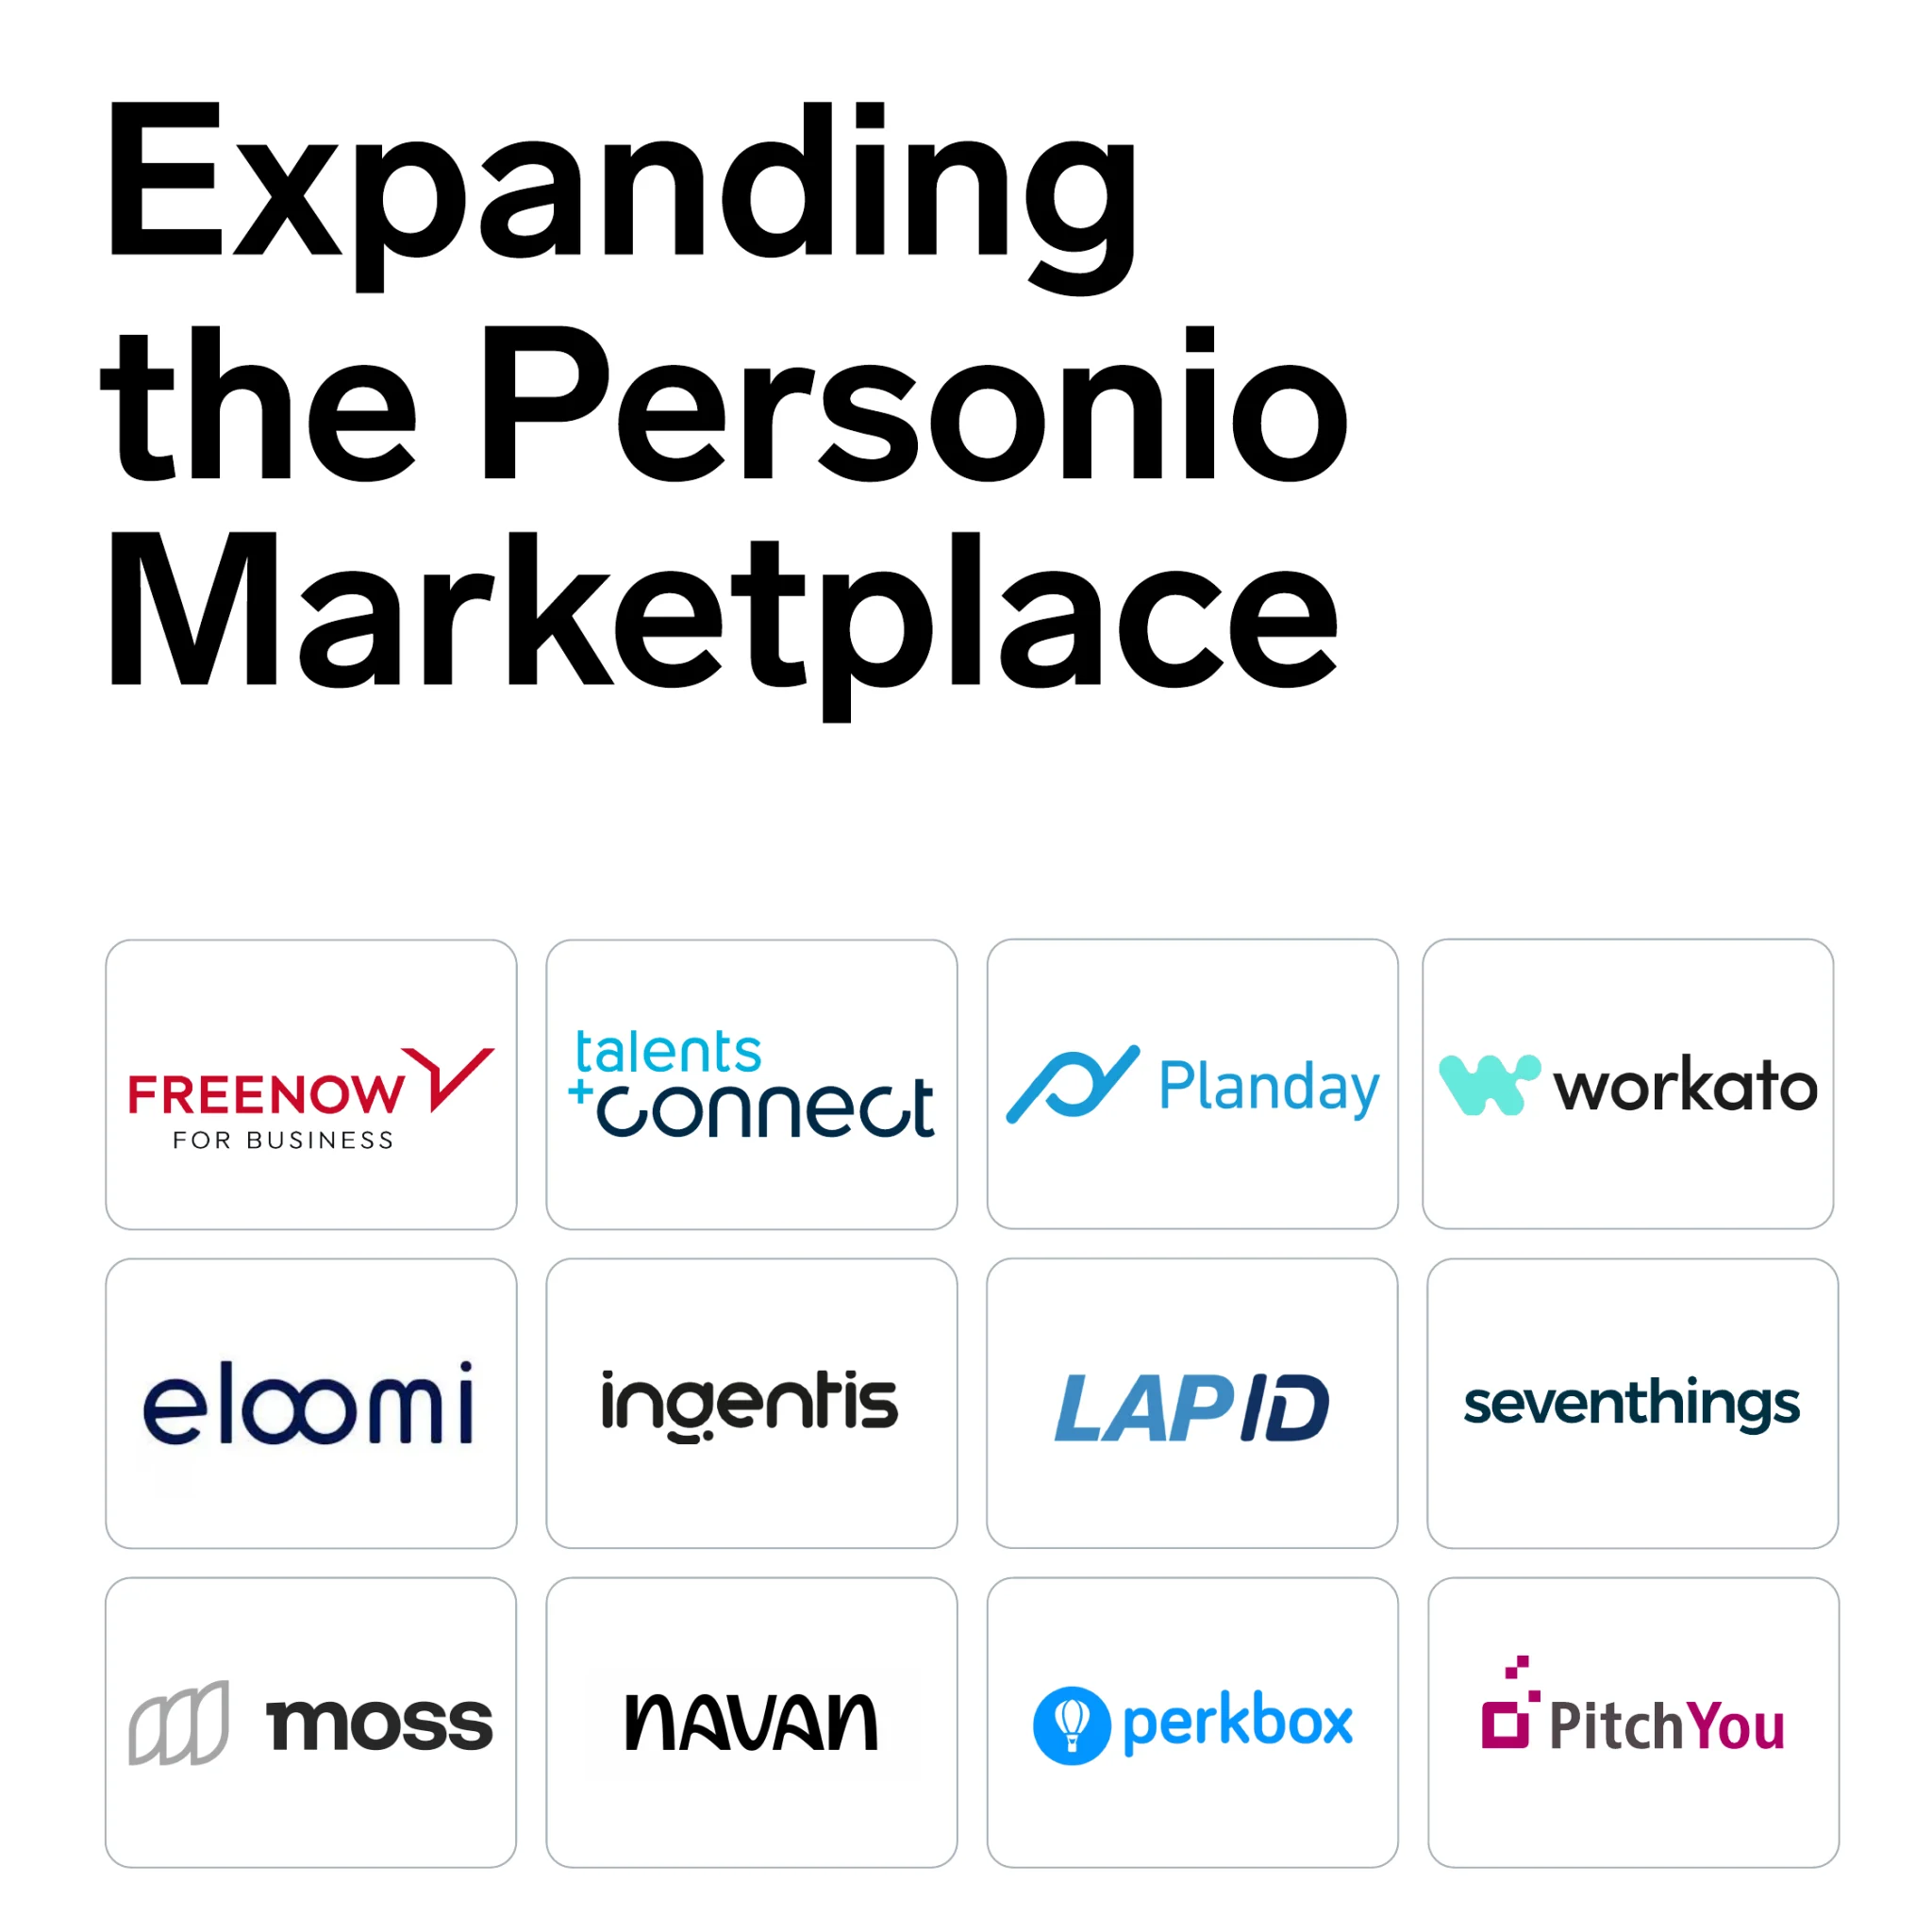 5 Important HR News Snippets to Know About (Personio Marketplace)